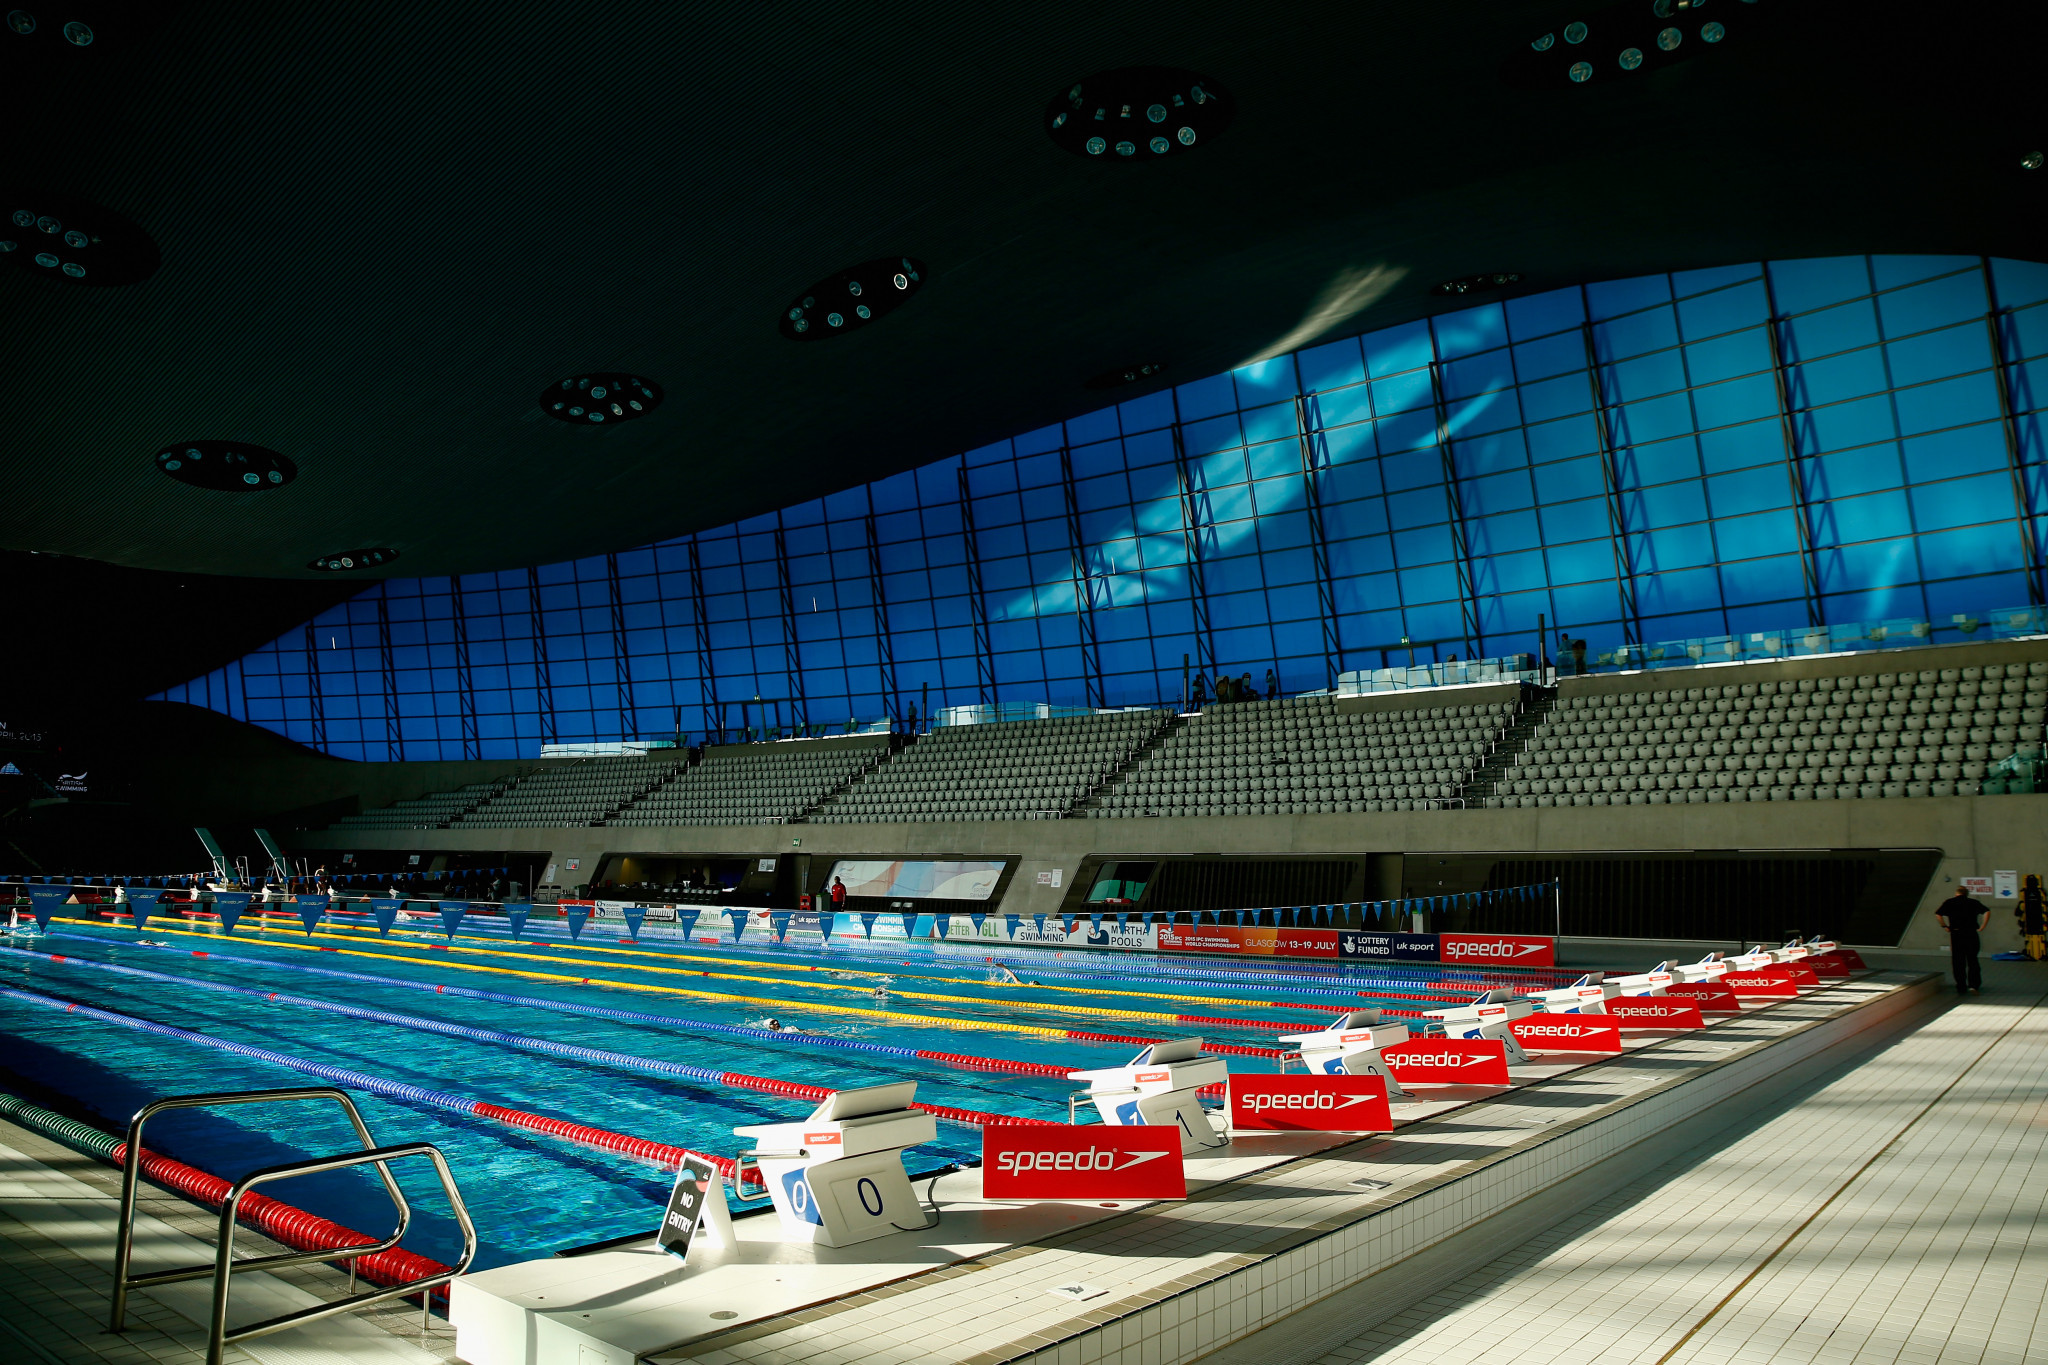 London Aquatics Centre will host the 2019 World Para Swimming Championships ©Getty Images